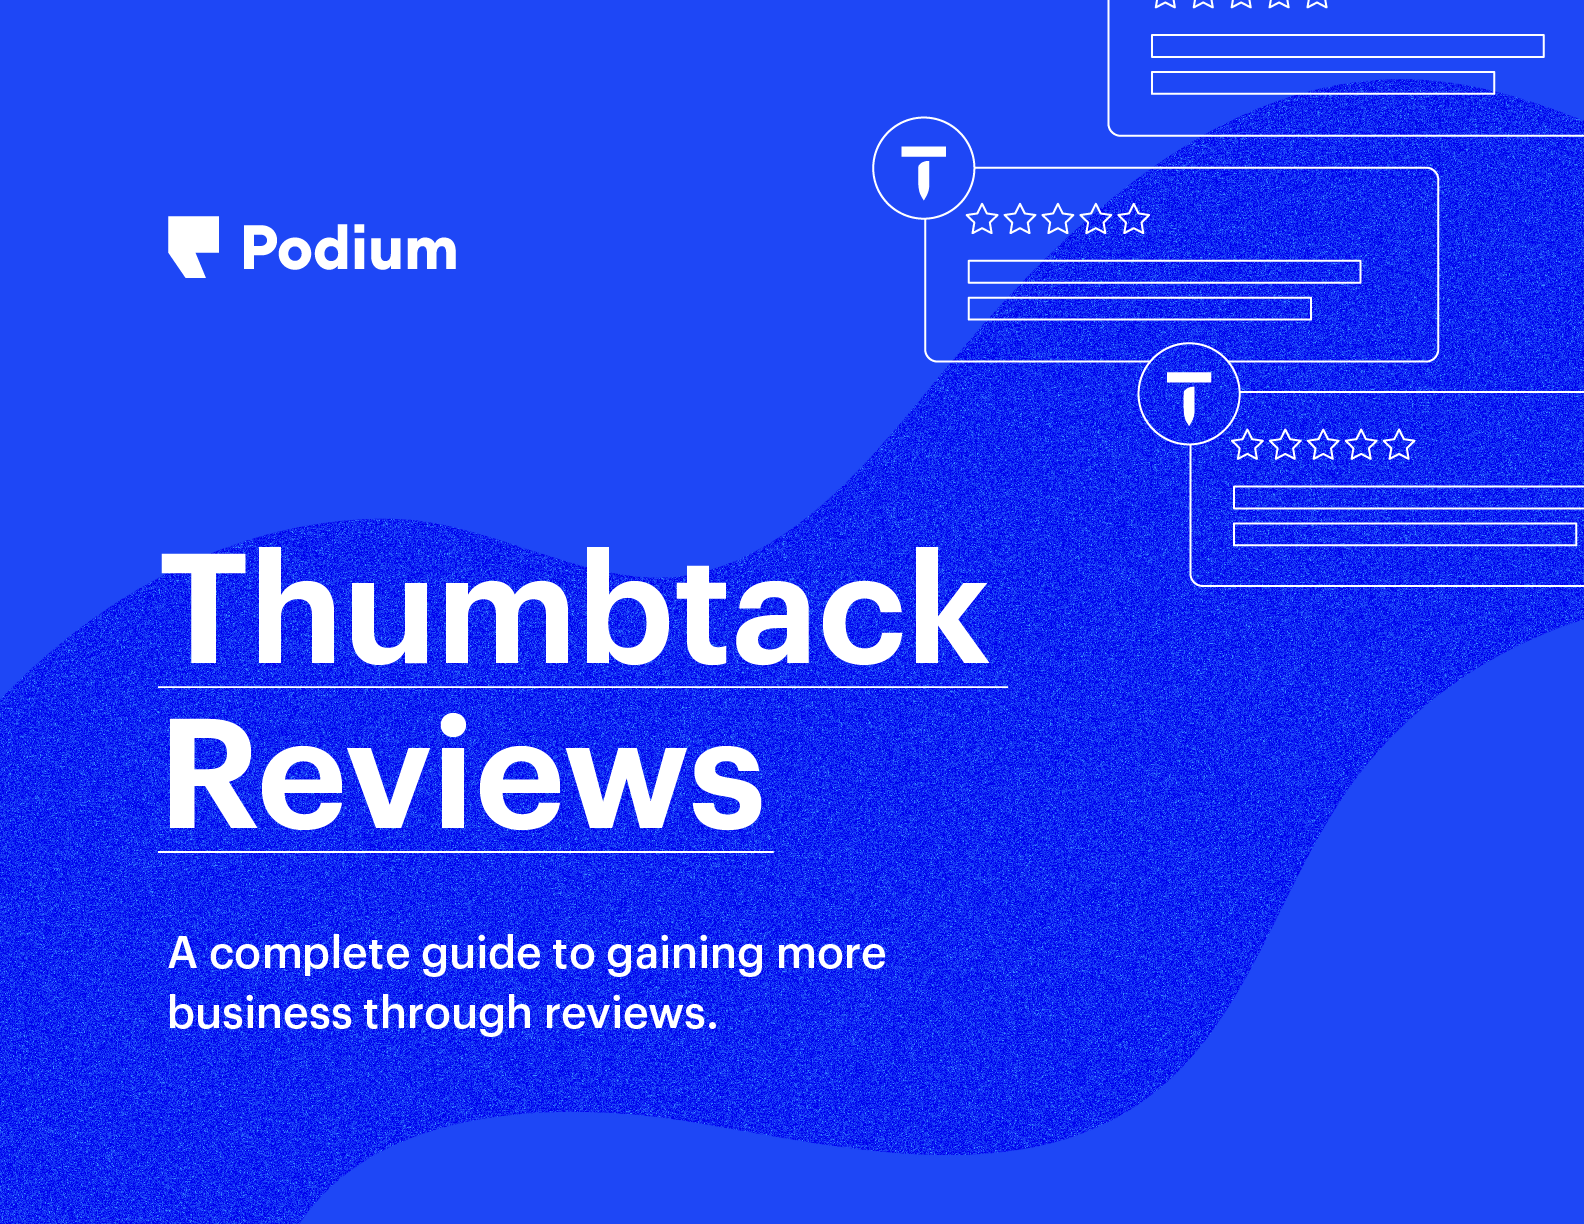 Thumbtack Reviews: A Complete Guide